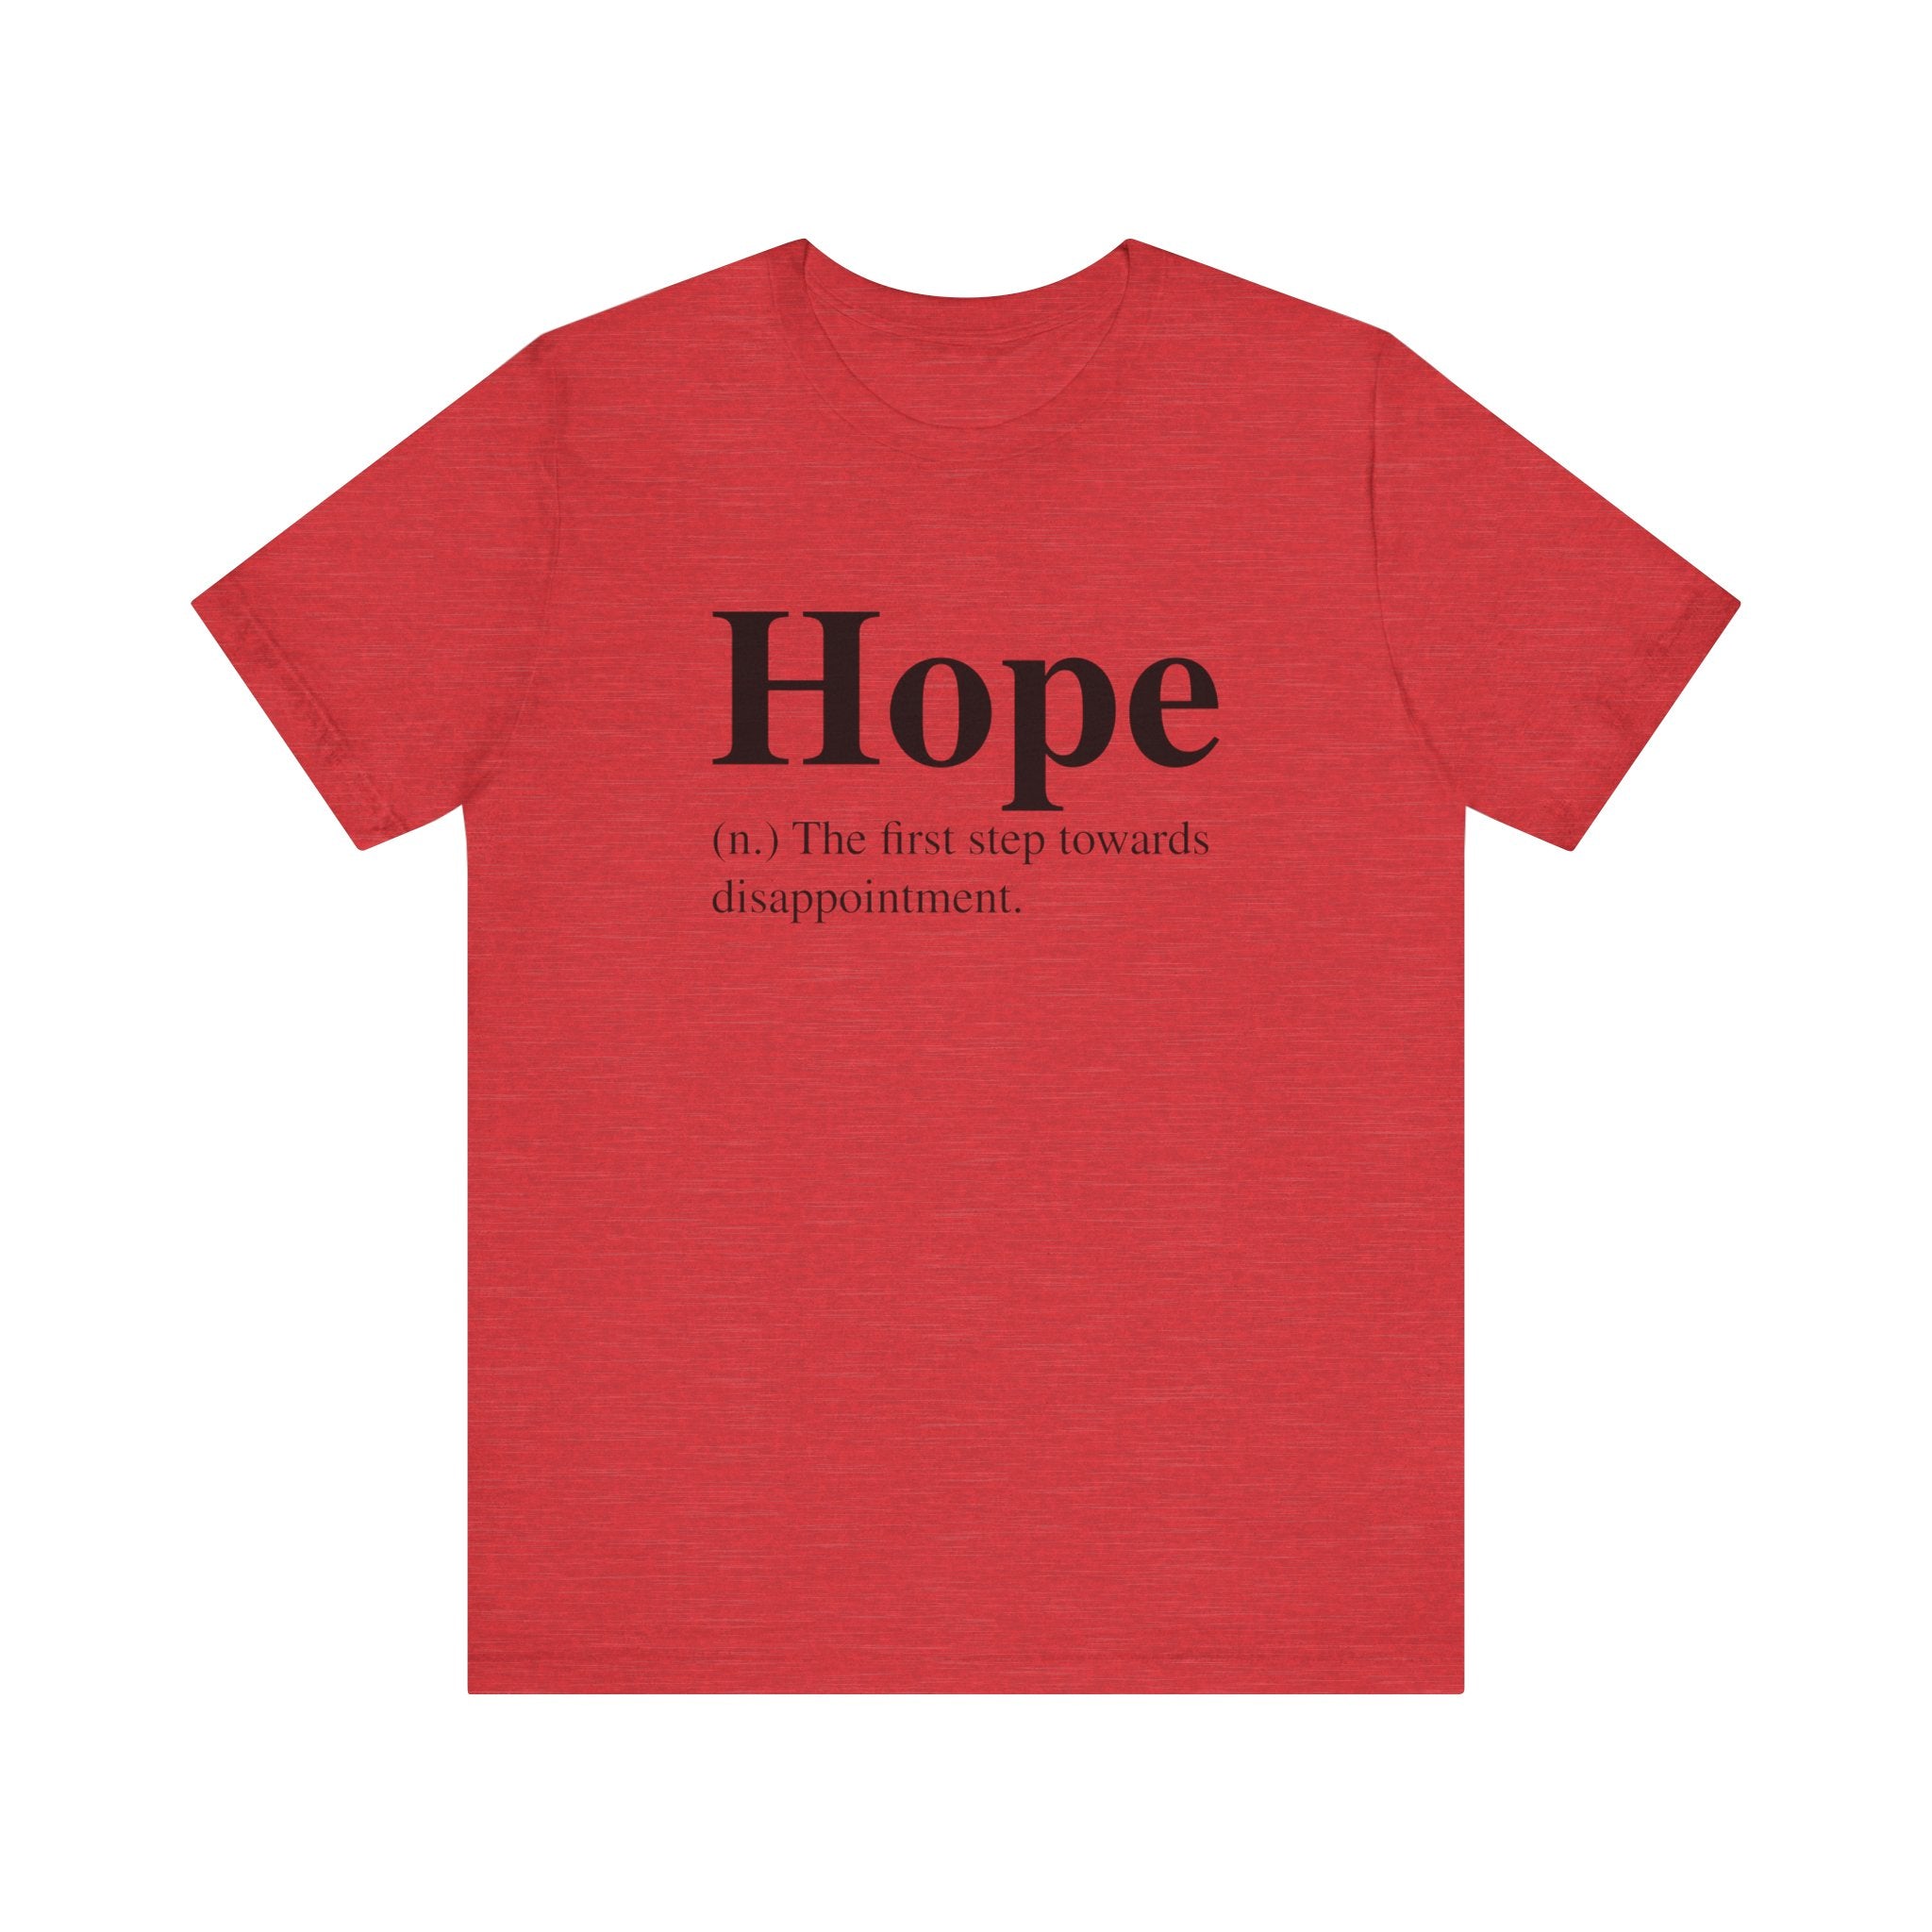 Red unisex Hope T-shirt with the word "Hope" and the definition "n.) the first step towards disappointment" printed in black text on the front.